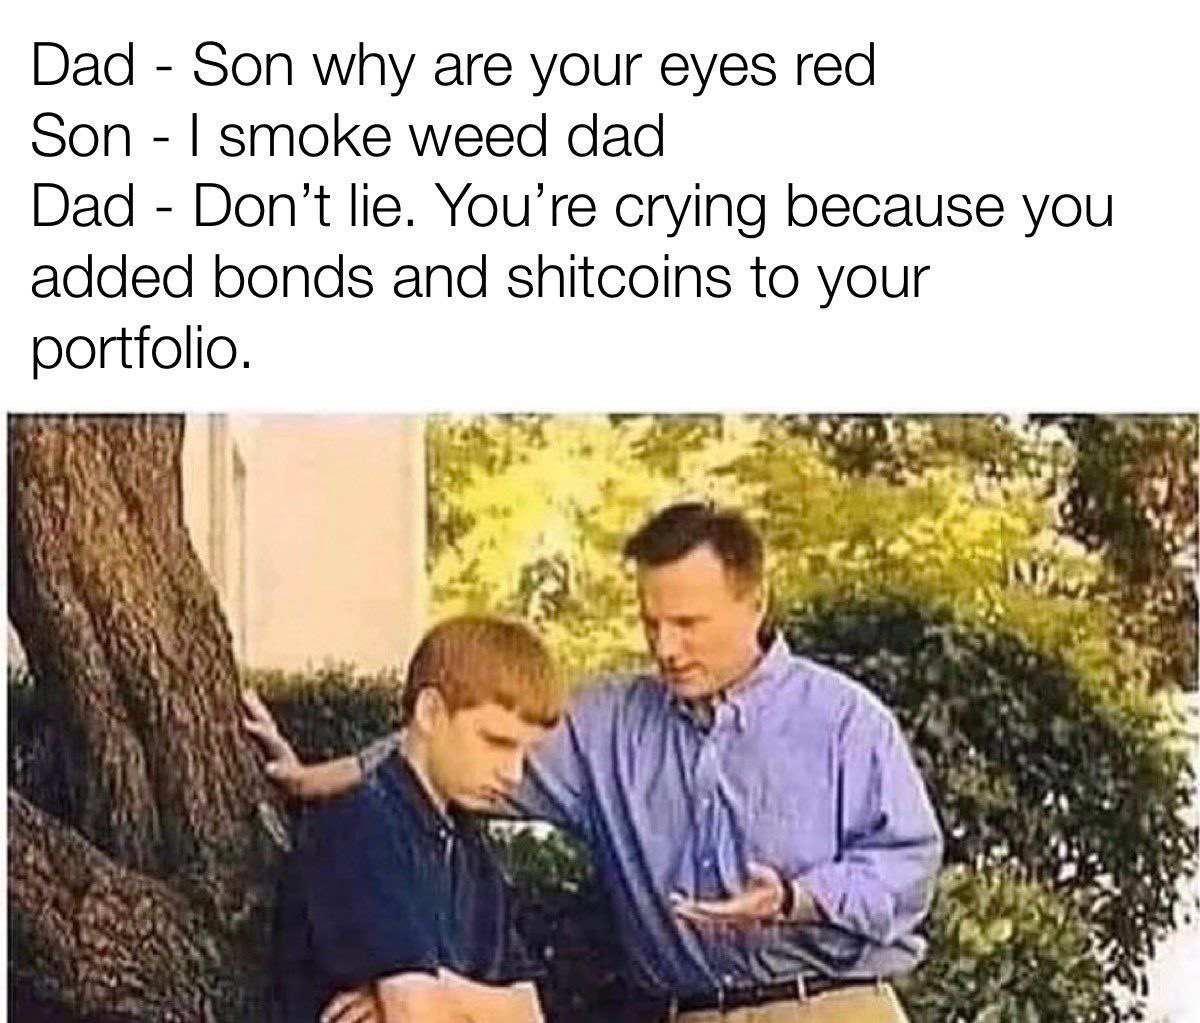 Dad - Son why are your eyes red
Son - | smoke weed dad
Dad - Don't lie. You're crying because you
added bonds and shitcoins to your
p ortfo l i o .
fa l o
Aw lo WA - {= \ { 7
E N ue